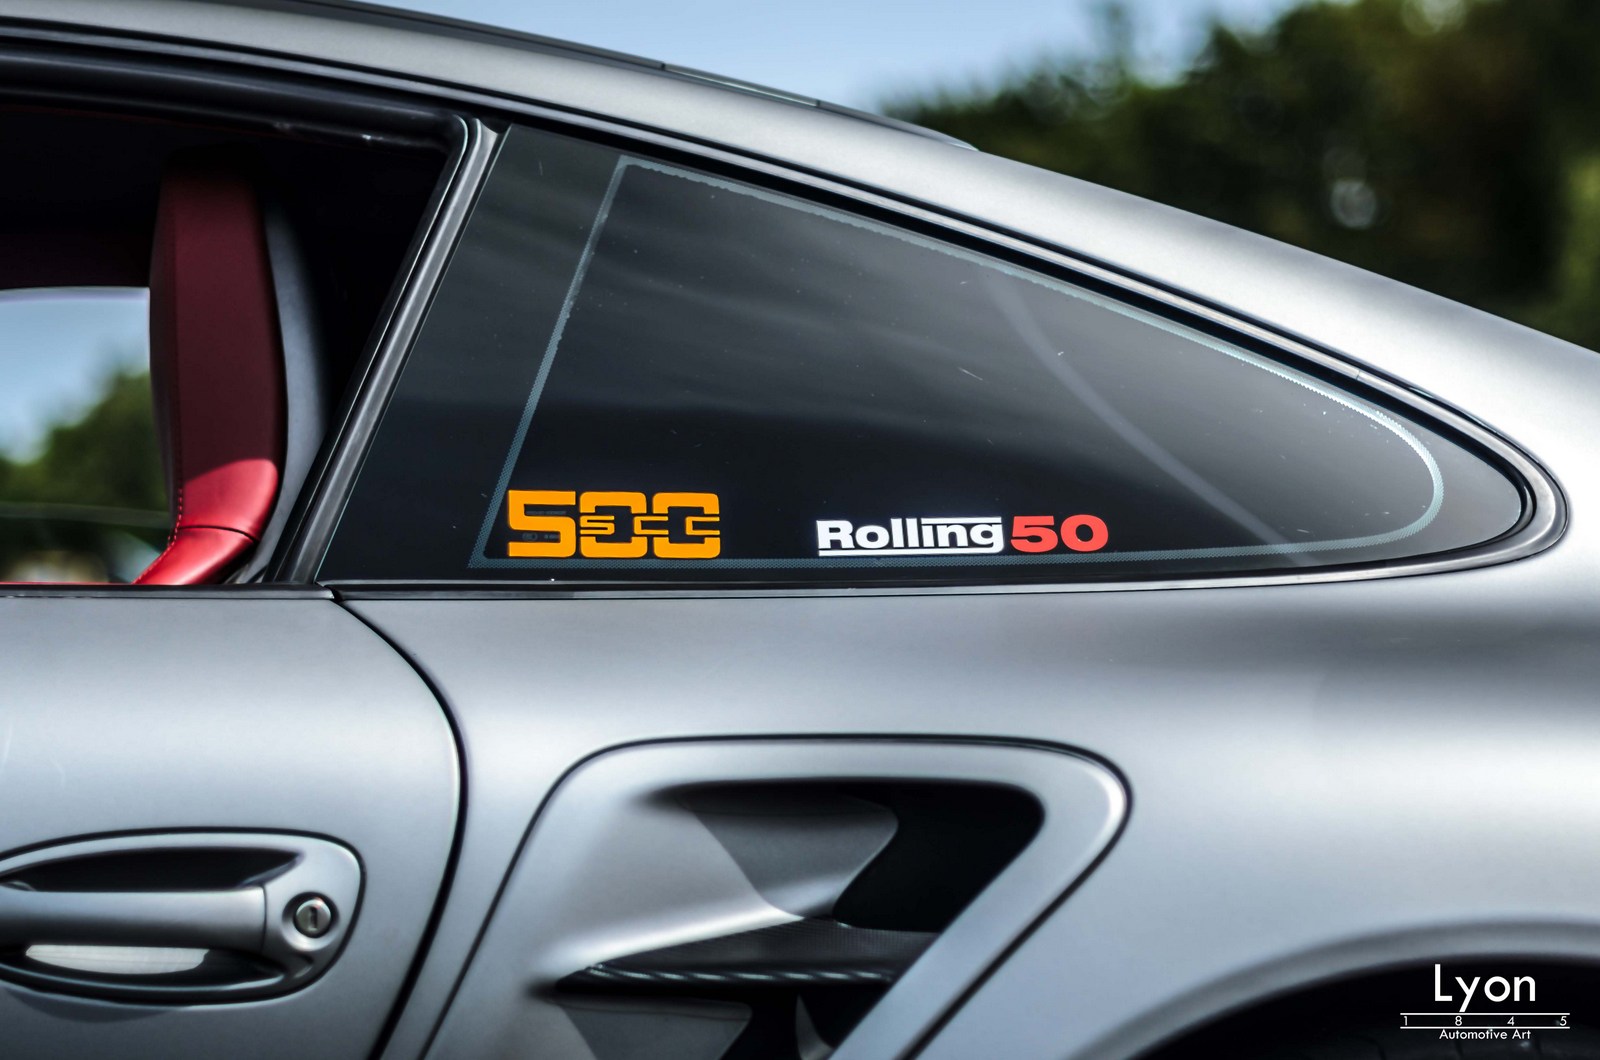 Event: Rolling50